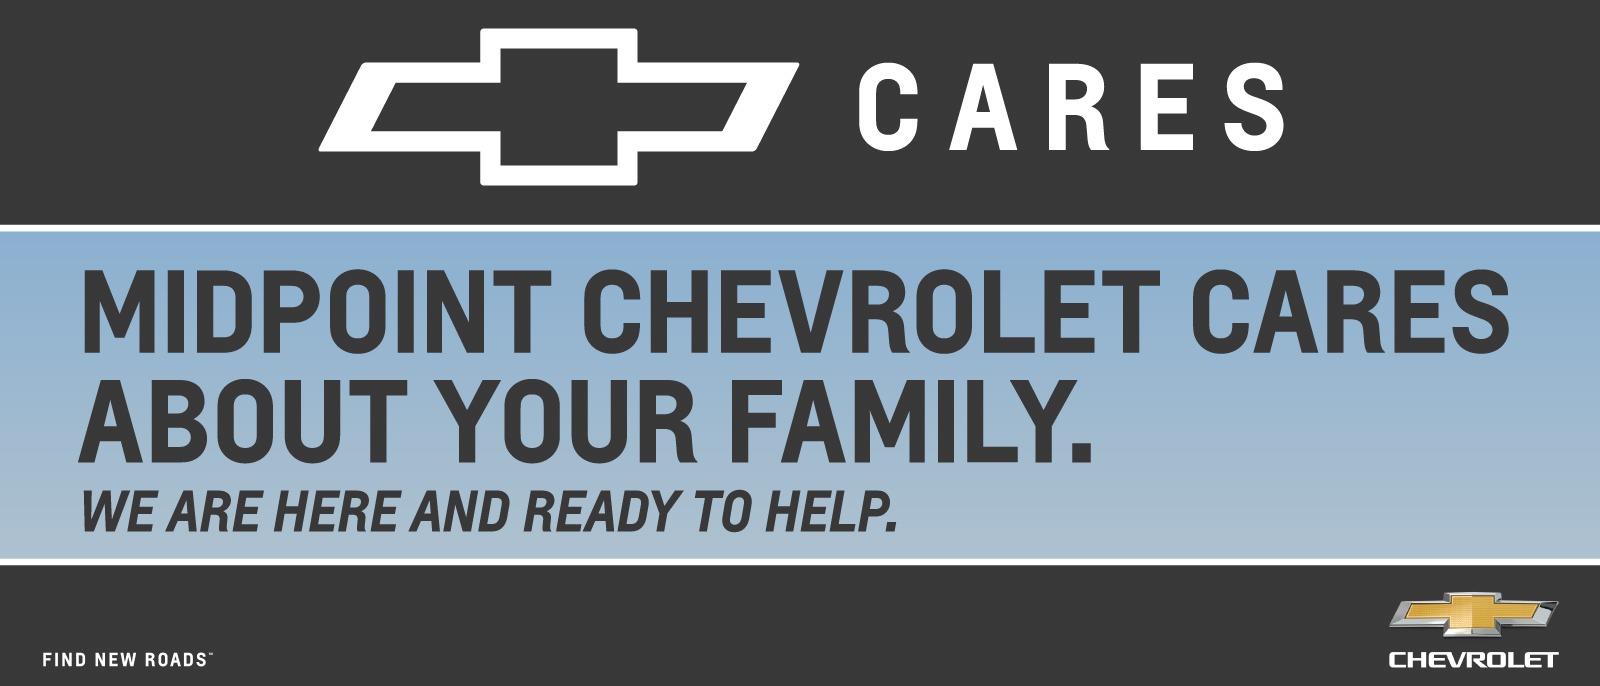 Midpoint Chevrolet cares about your family. We are here and ready to help.